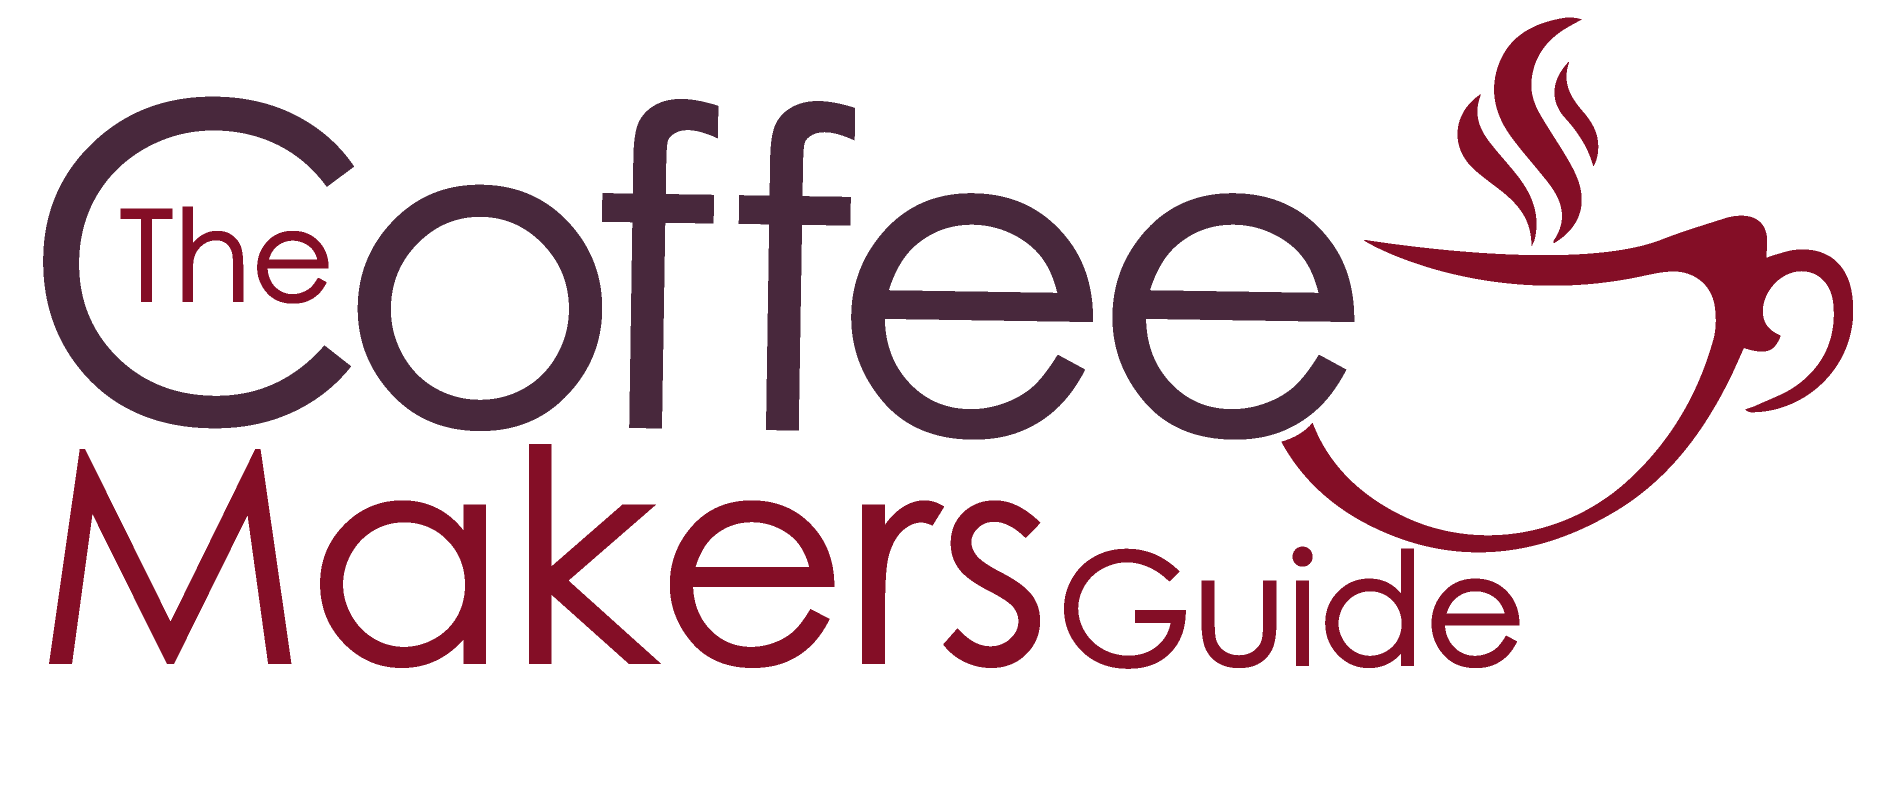 The Coffee Makers Guide